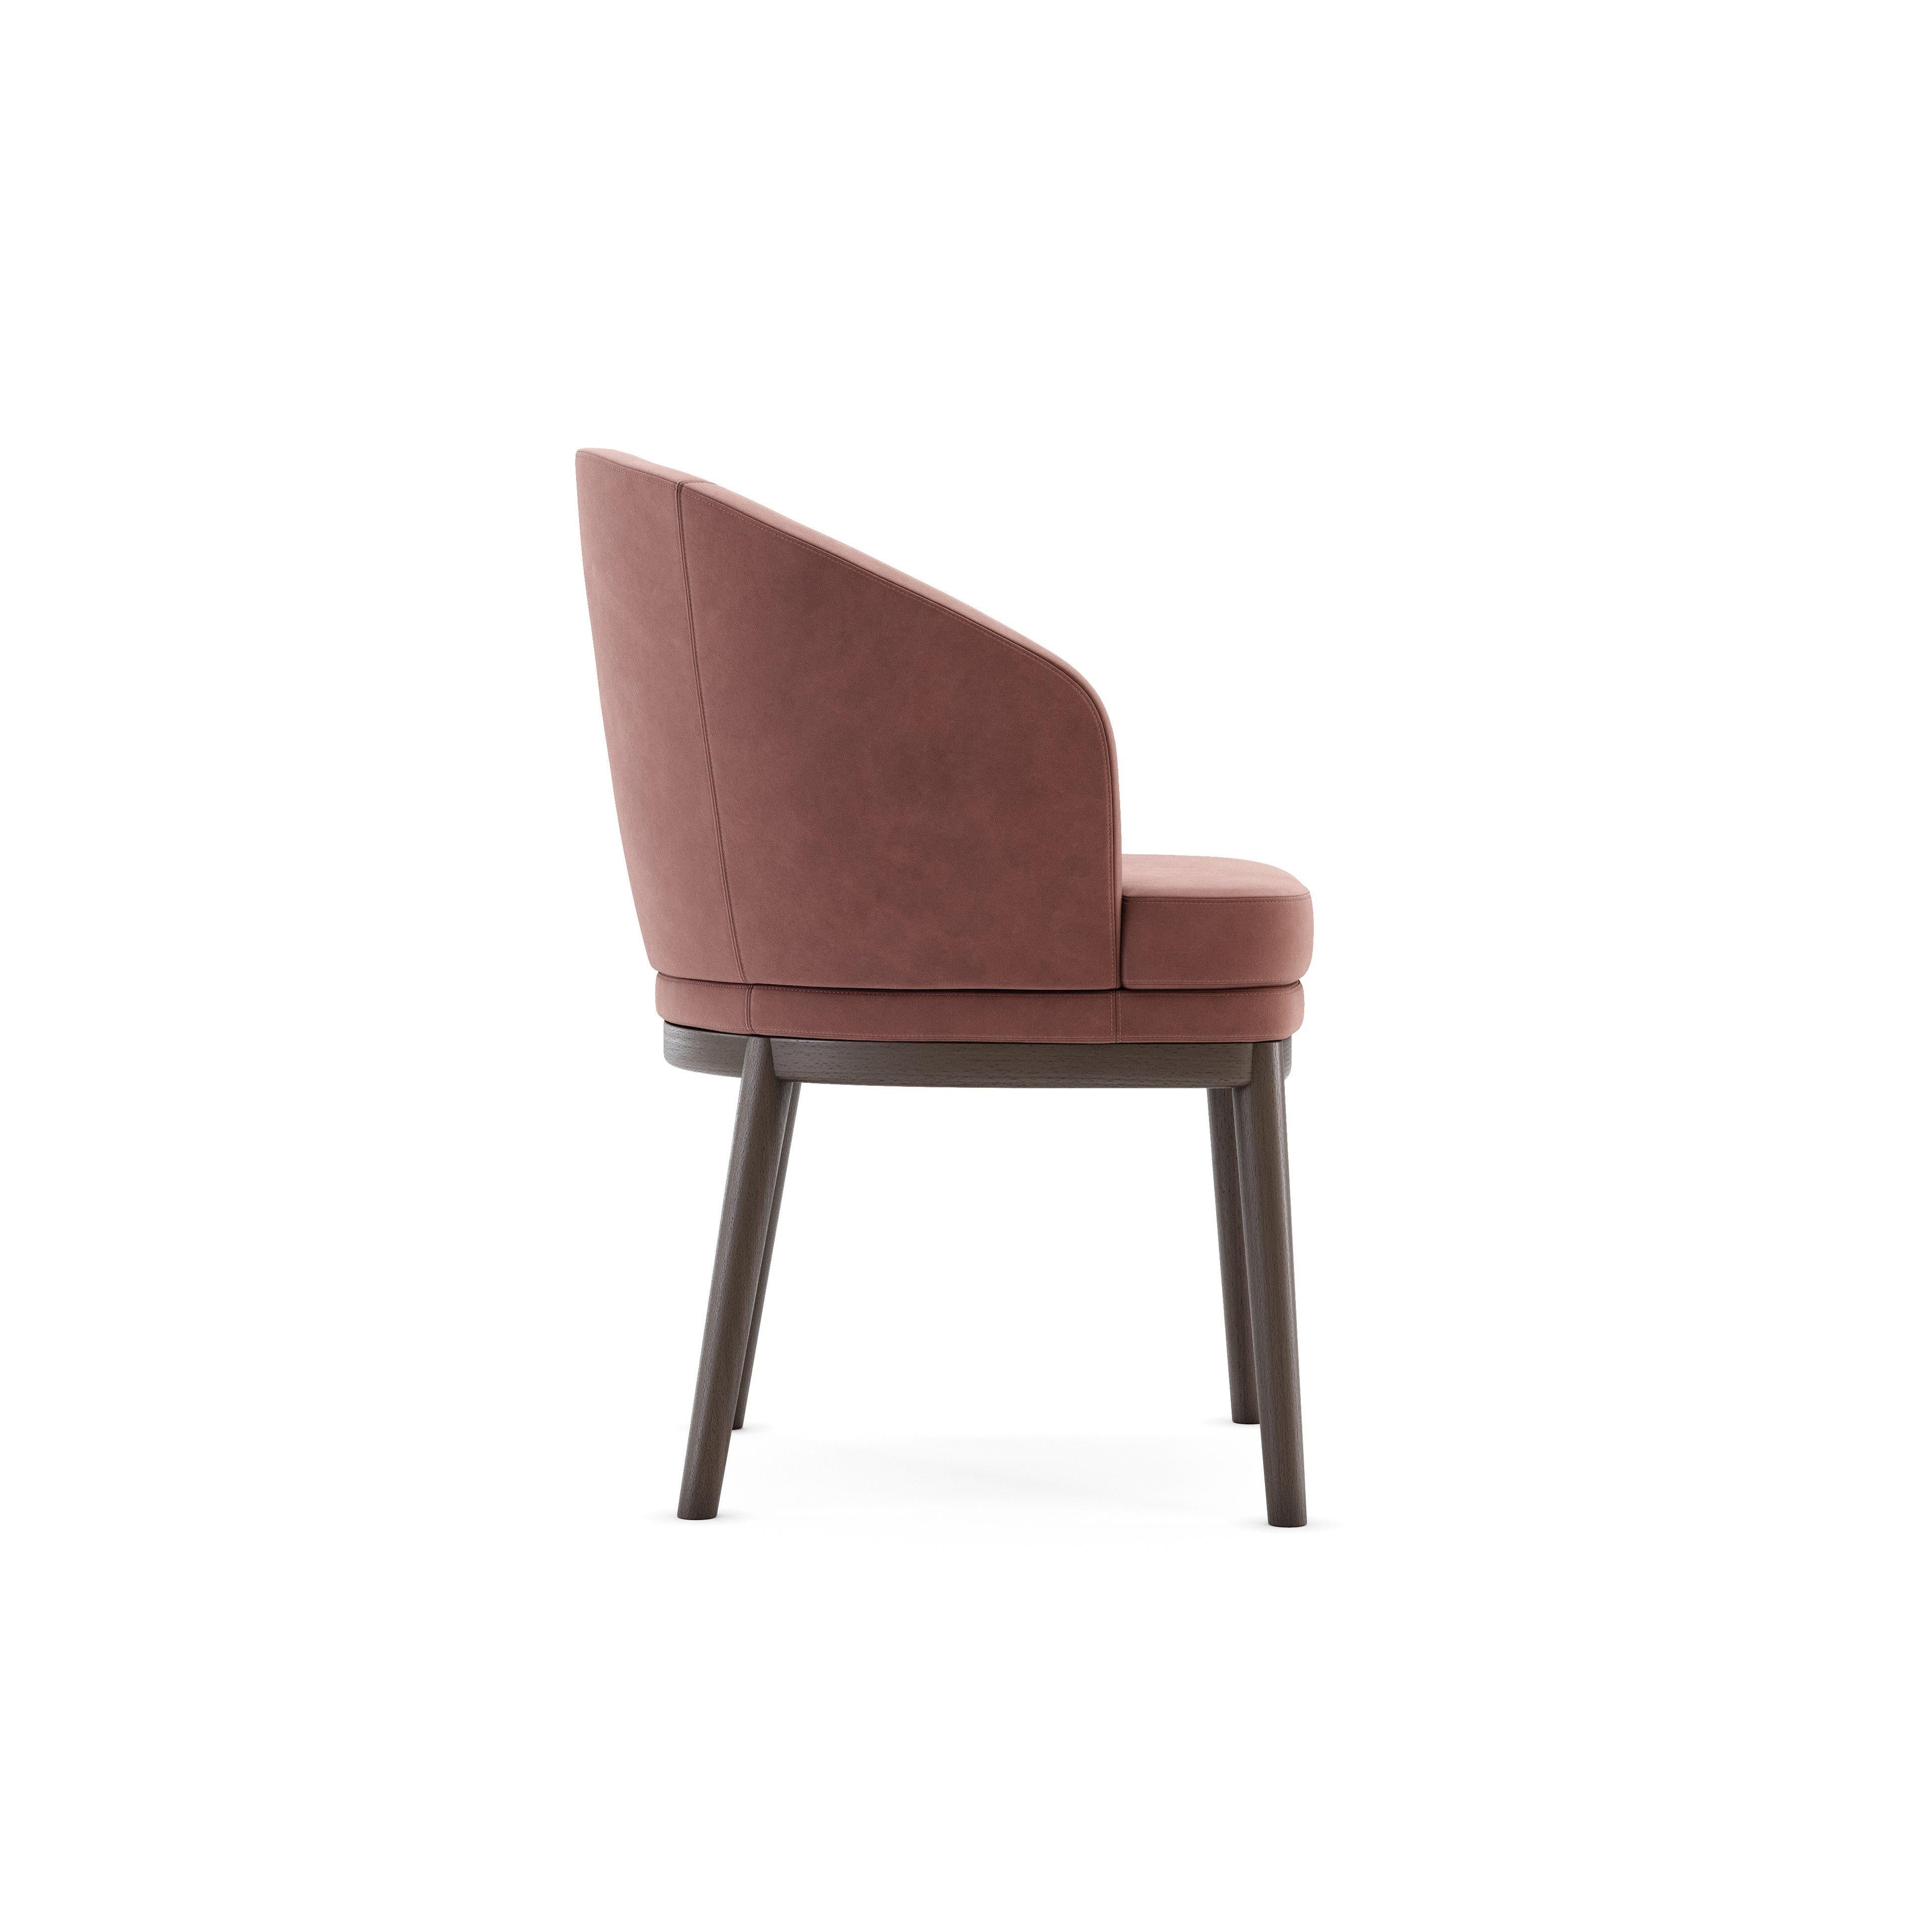 Portuguese 8 Contemporary Dining Chairs Offered in Rose Velvet